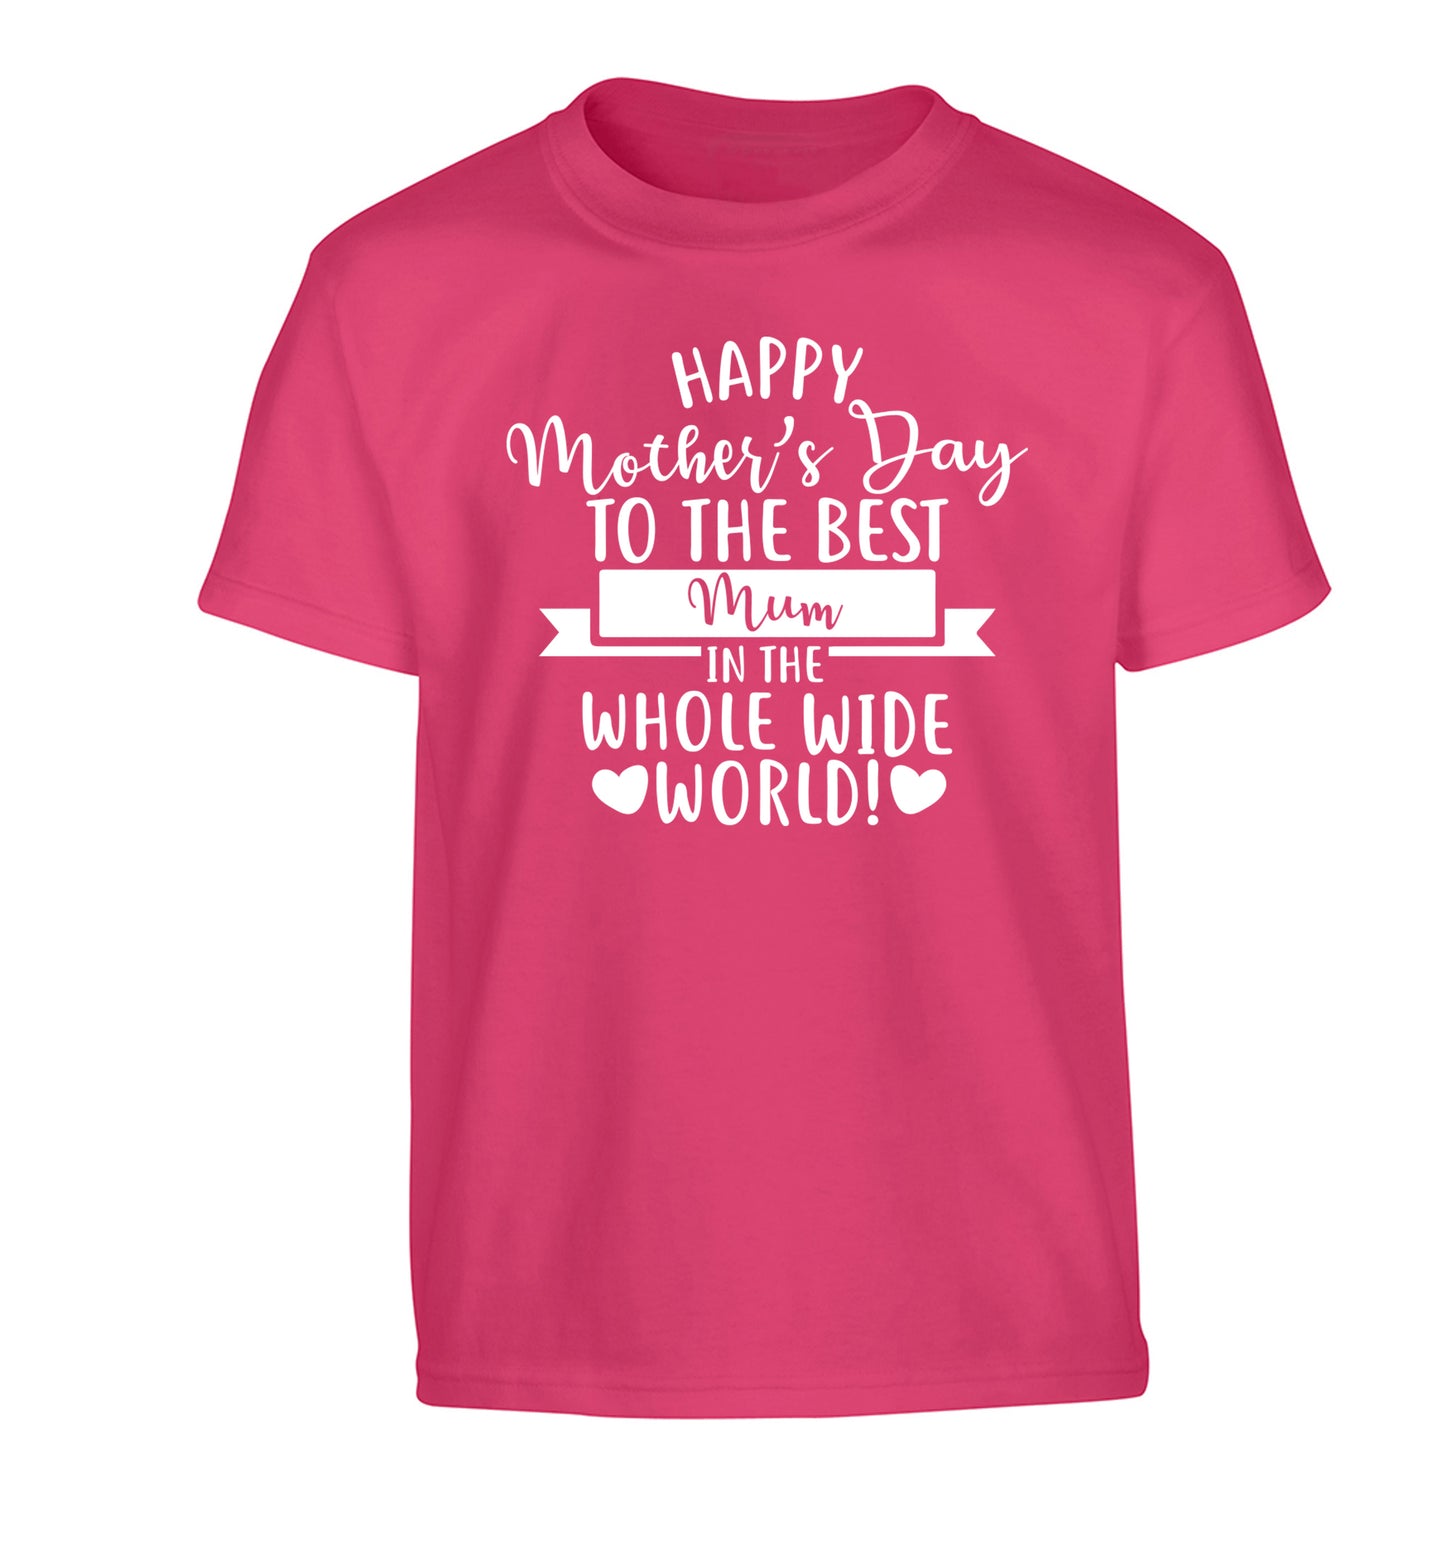 Happy Mother's Day to the best mum in the whole wide world! Children's pink Tshirt 12-13 Years